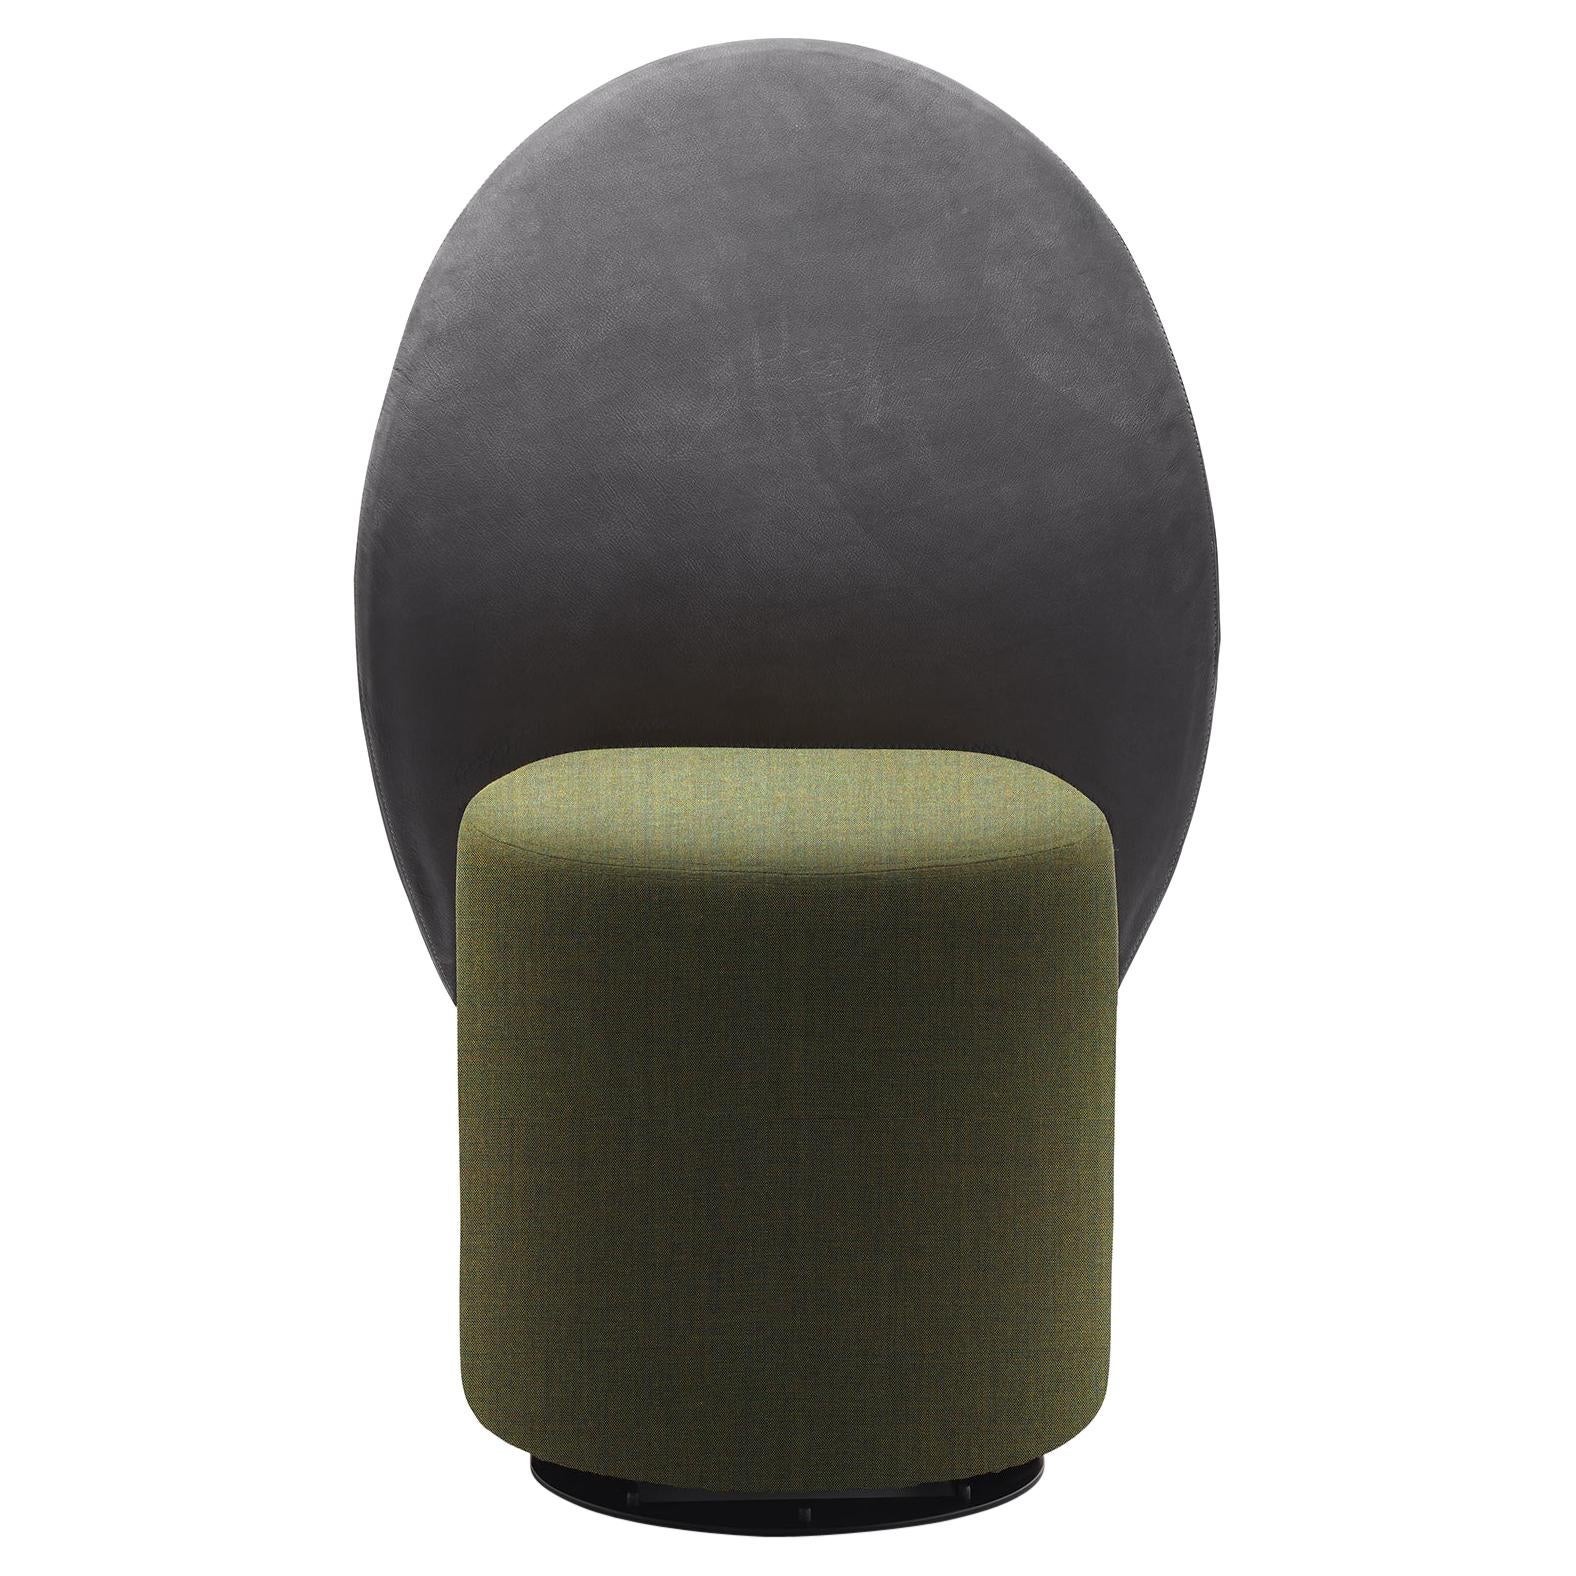 Loomi Armchair with Black & Green Upholshtered Seat and Back by Lapo Ciatti For Sale